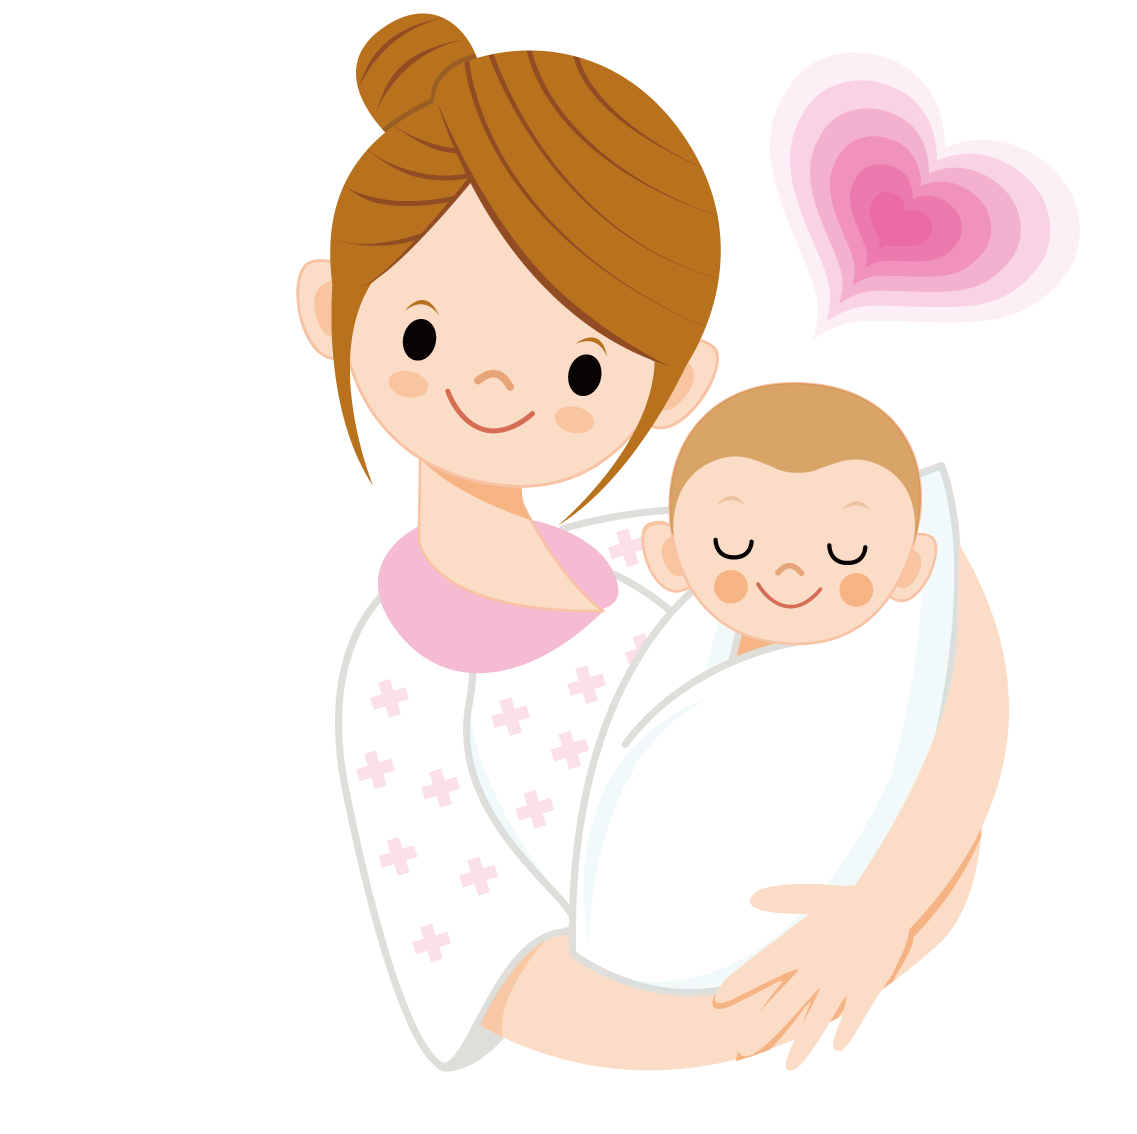 Baby Infant Cartoon Holding Mother Free Download Image Clipart